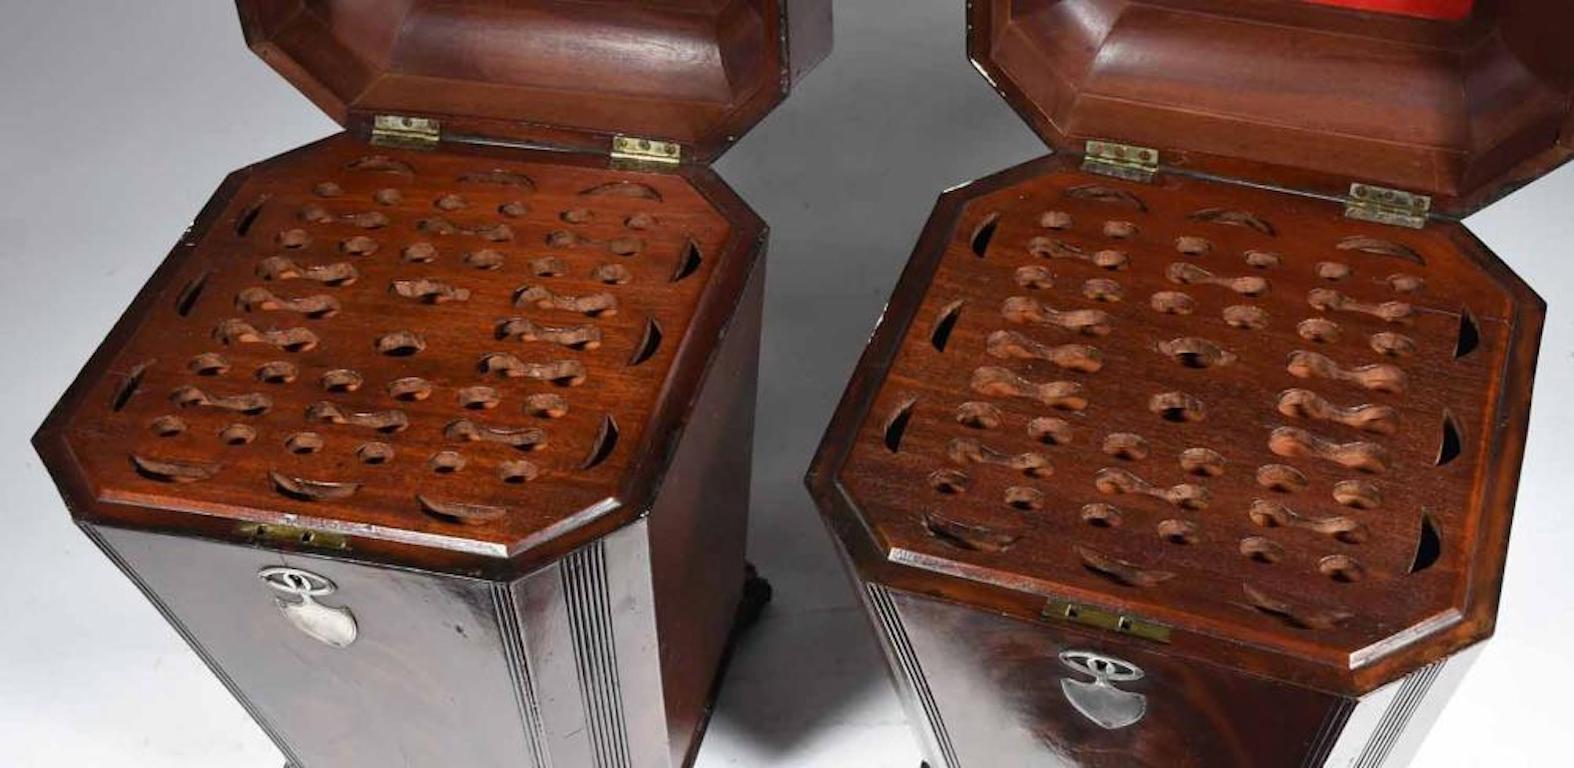 English Pair of 19th Century Regency Sarcophagus Shaped Cutlery Urn Boxes